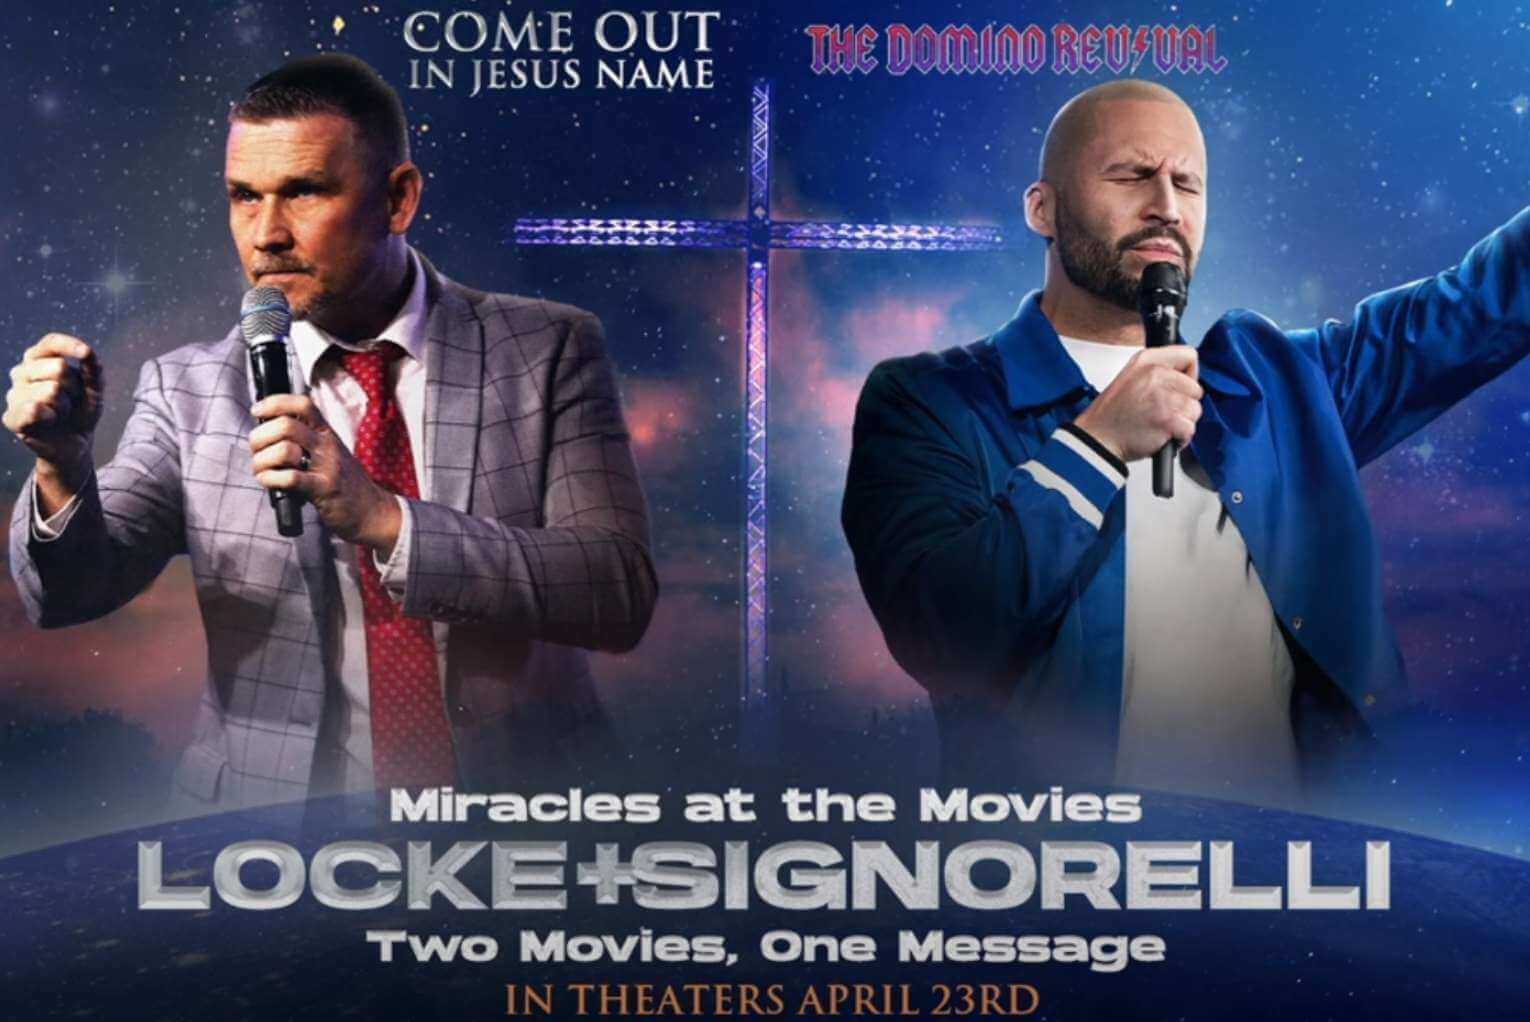 ‘Miracles at the Movies’: ‘Come Out in Jesus Name’ and ‘The Domino Revival’ Coming to Theaters for Unprecedented Evening